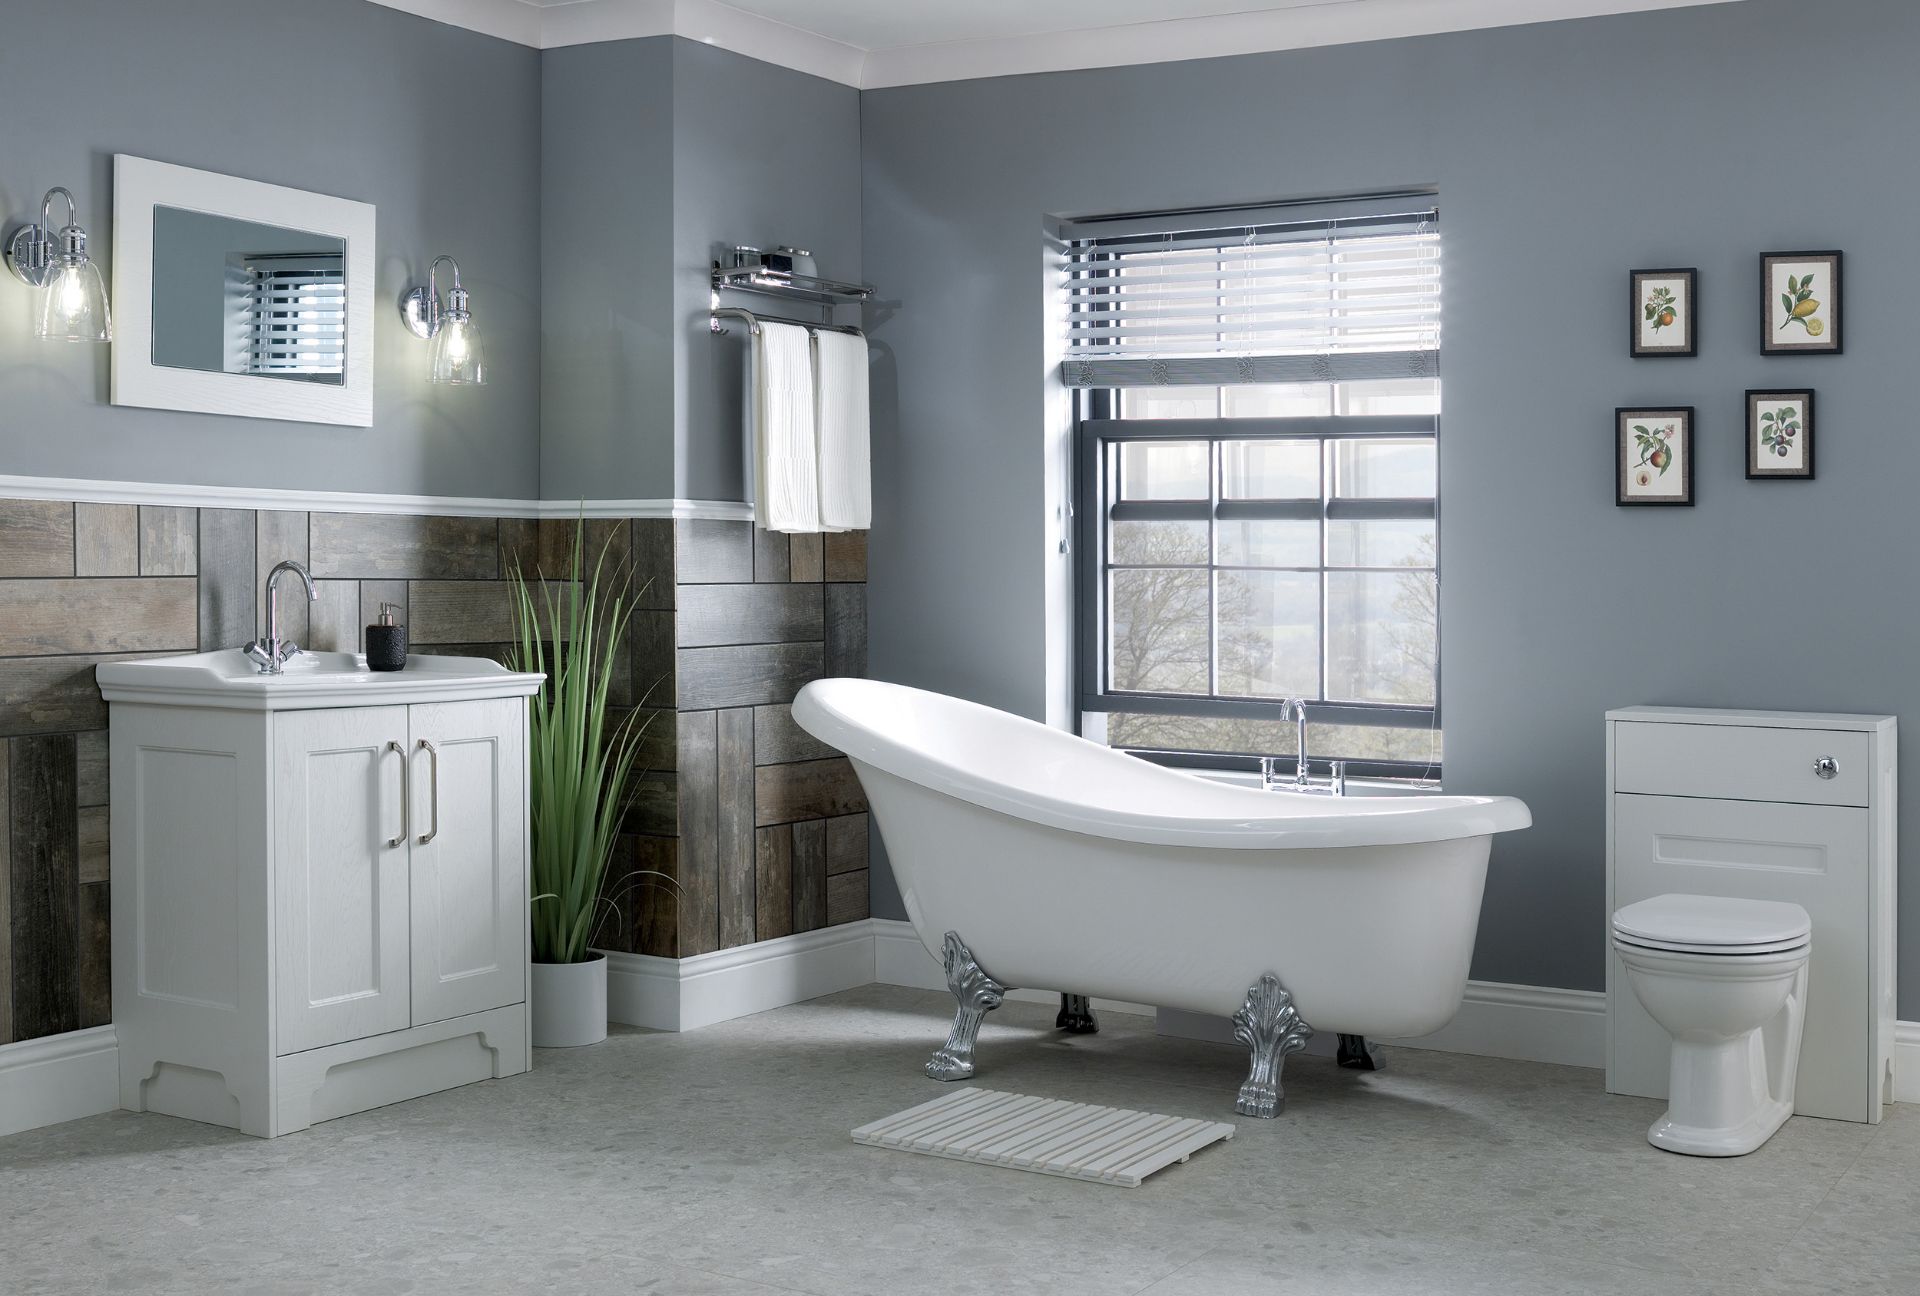 RRP £625 - Clay White Chelworth FS Vanity Unit - 600 x 460 x 720mm - 4651. - Image 3 of 3